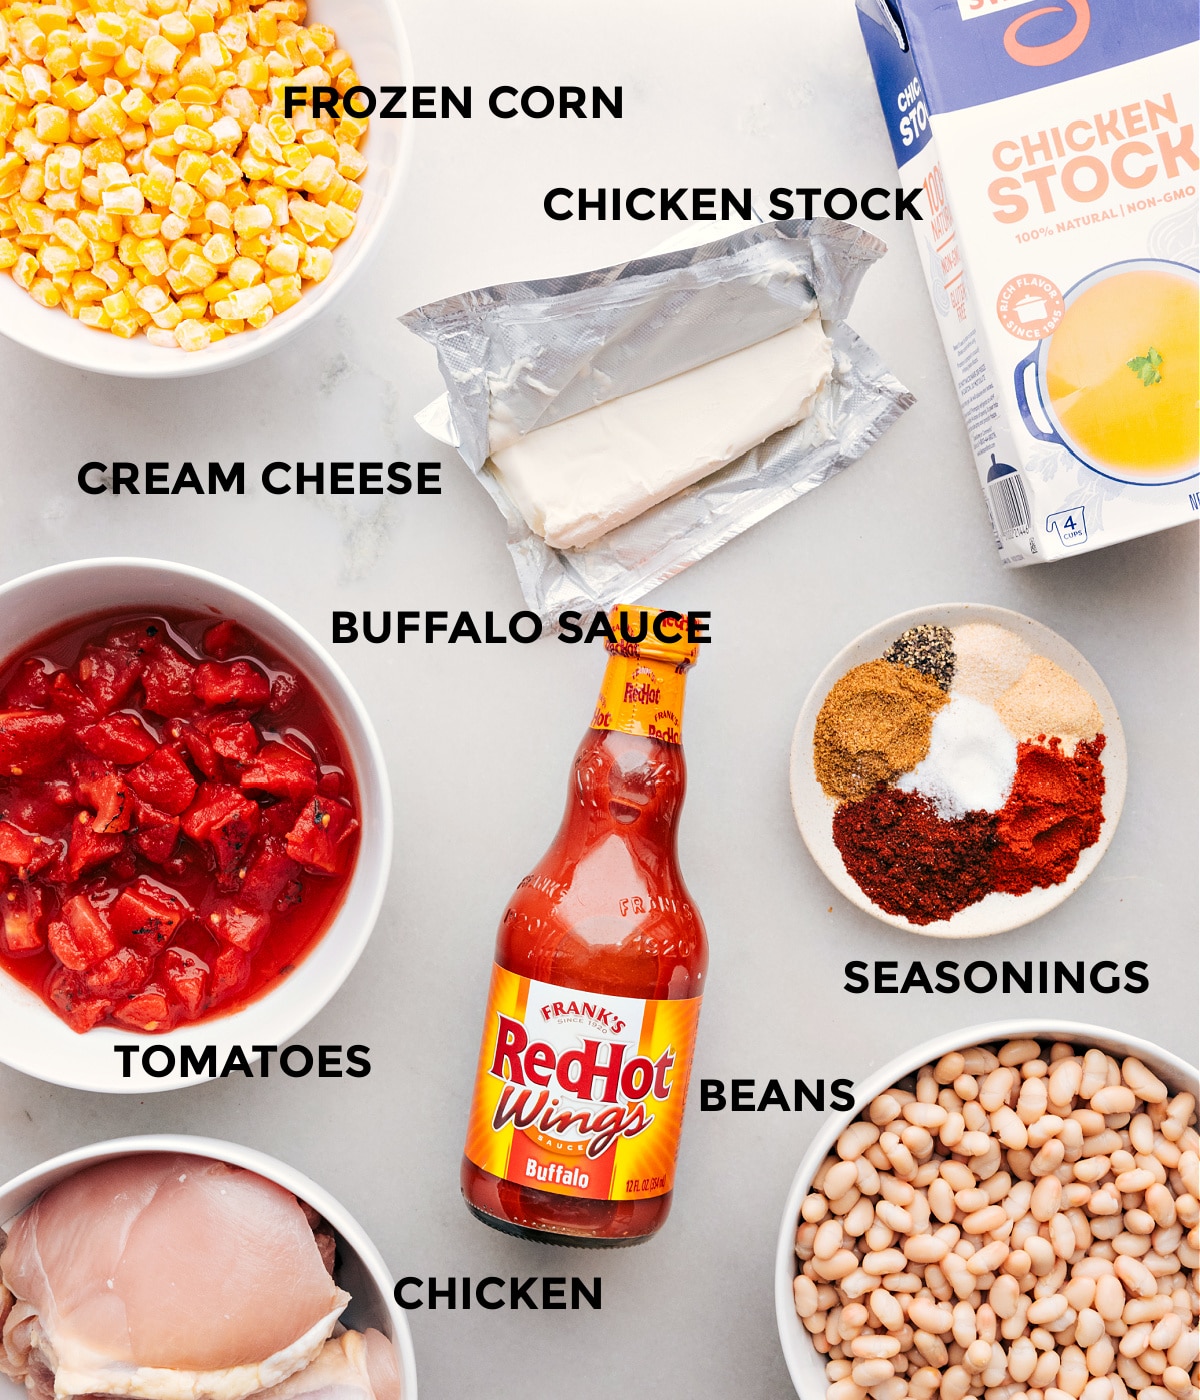 Ingredients used in this dish, including hot sauce, corn, beans, tomatoes, chicken stock, and chicken.